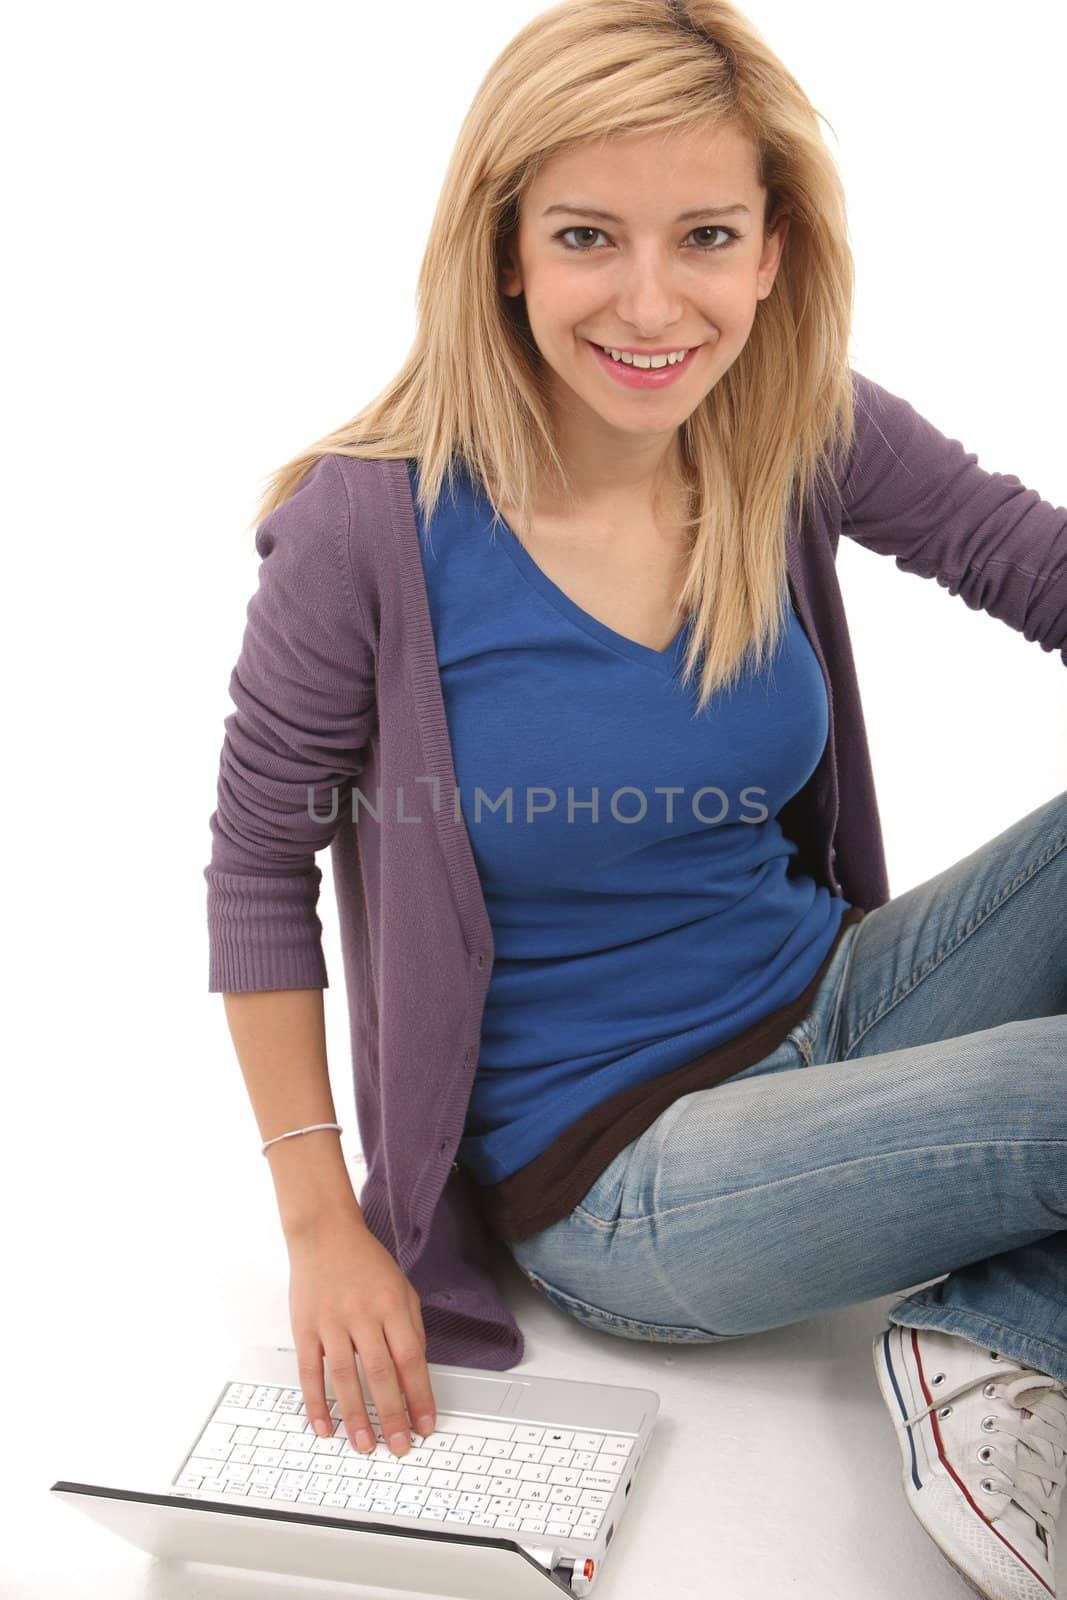 Smiling girl connected with her laptop on a white background